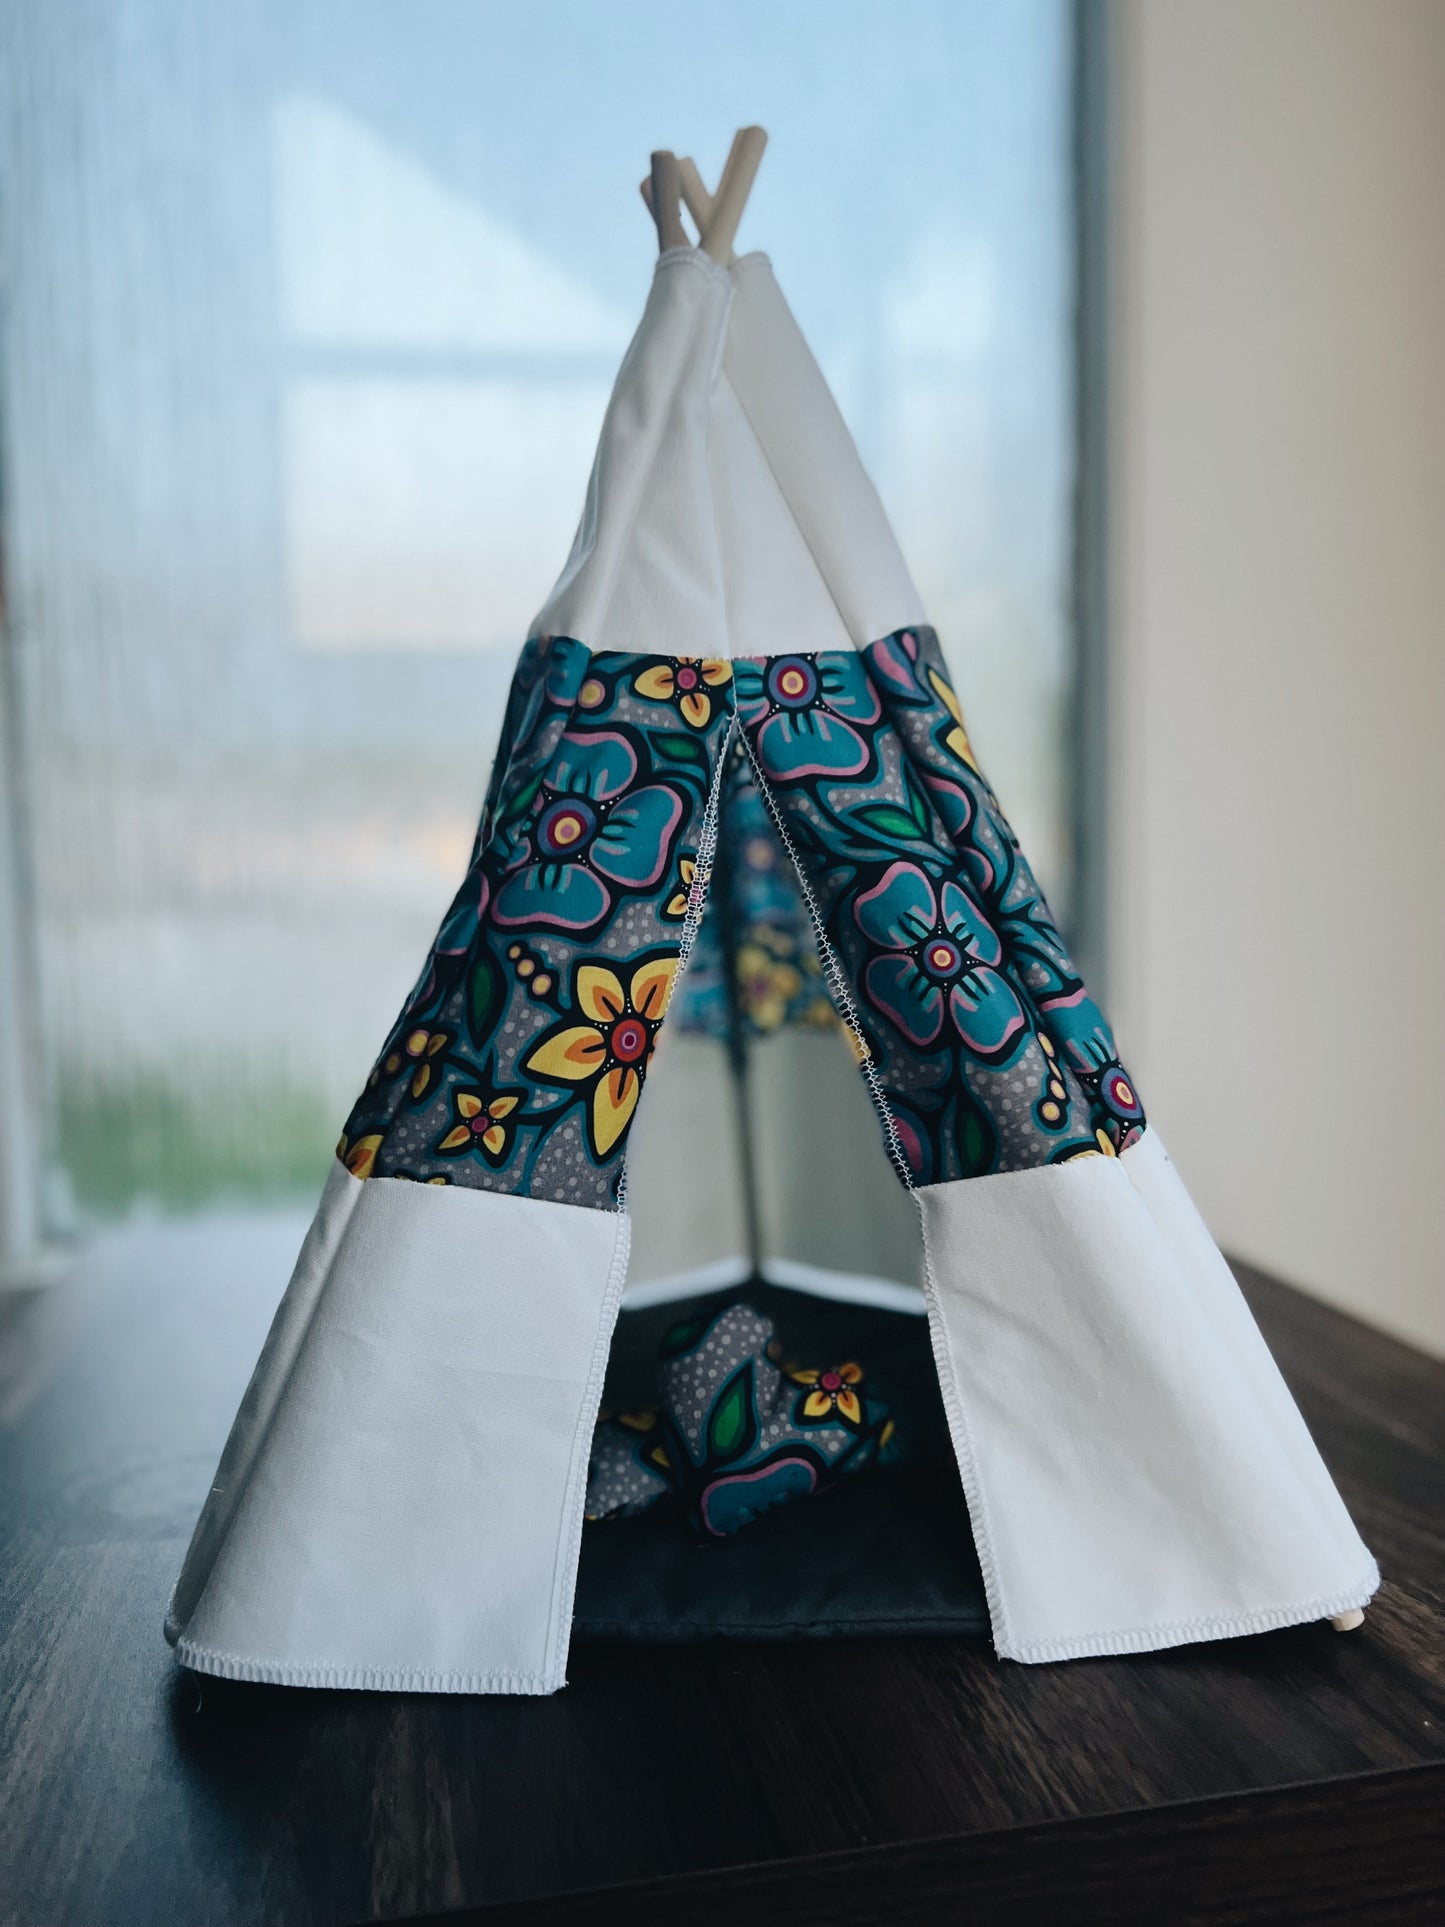 Teepee for display or use with 11.5 inch doll